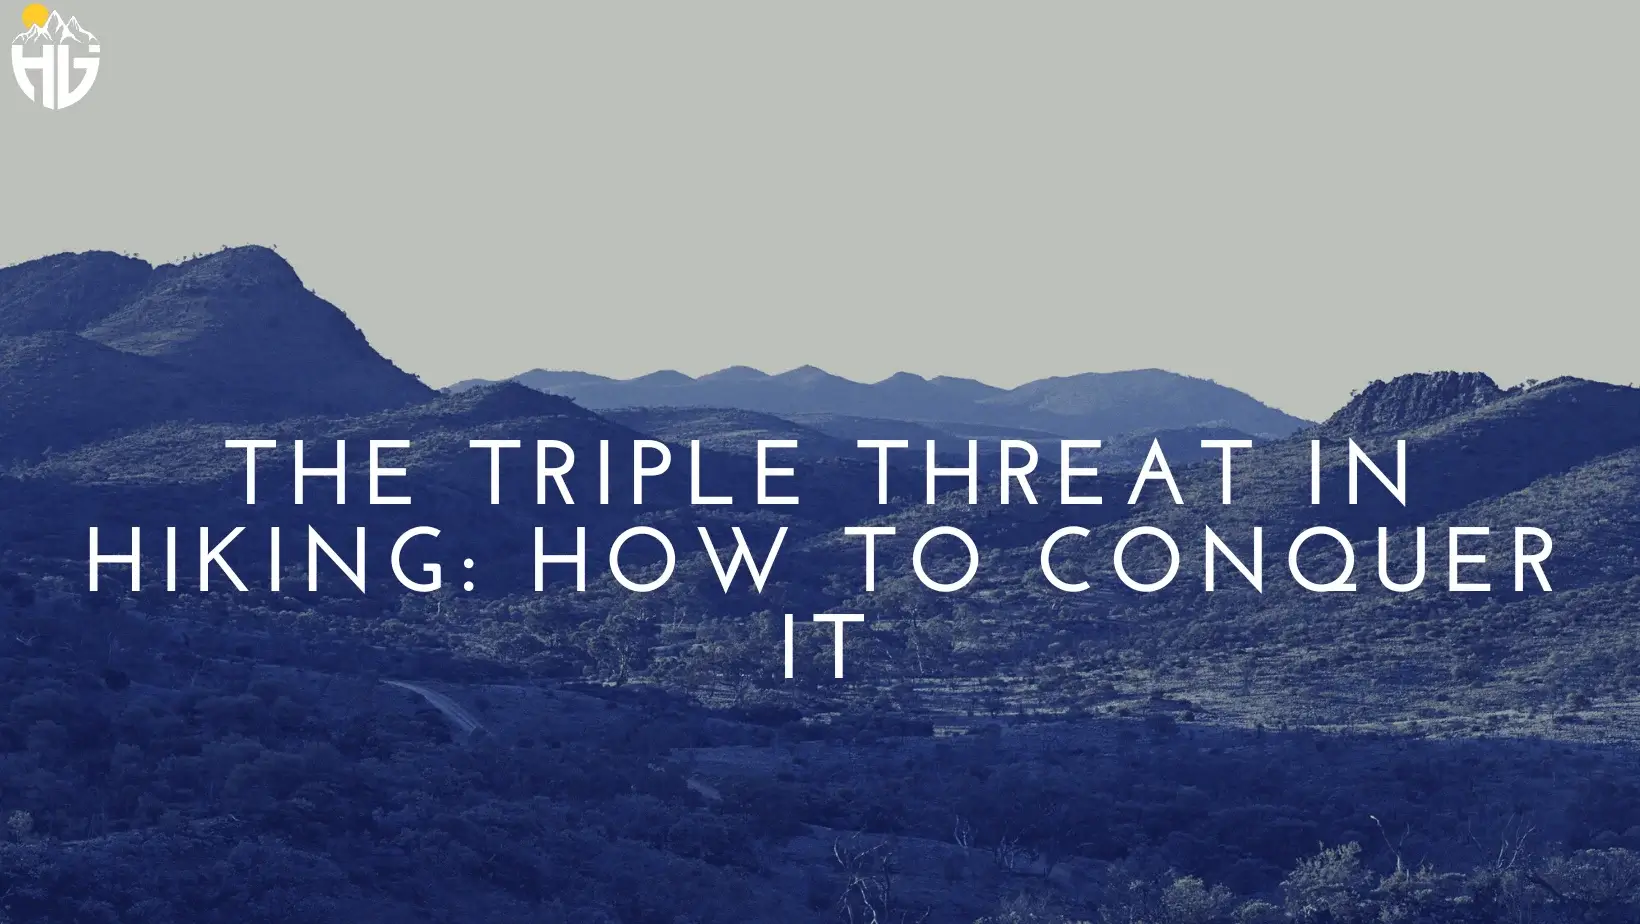 The Triple Threat in Hiking: How to Conquer It